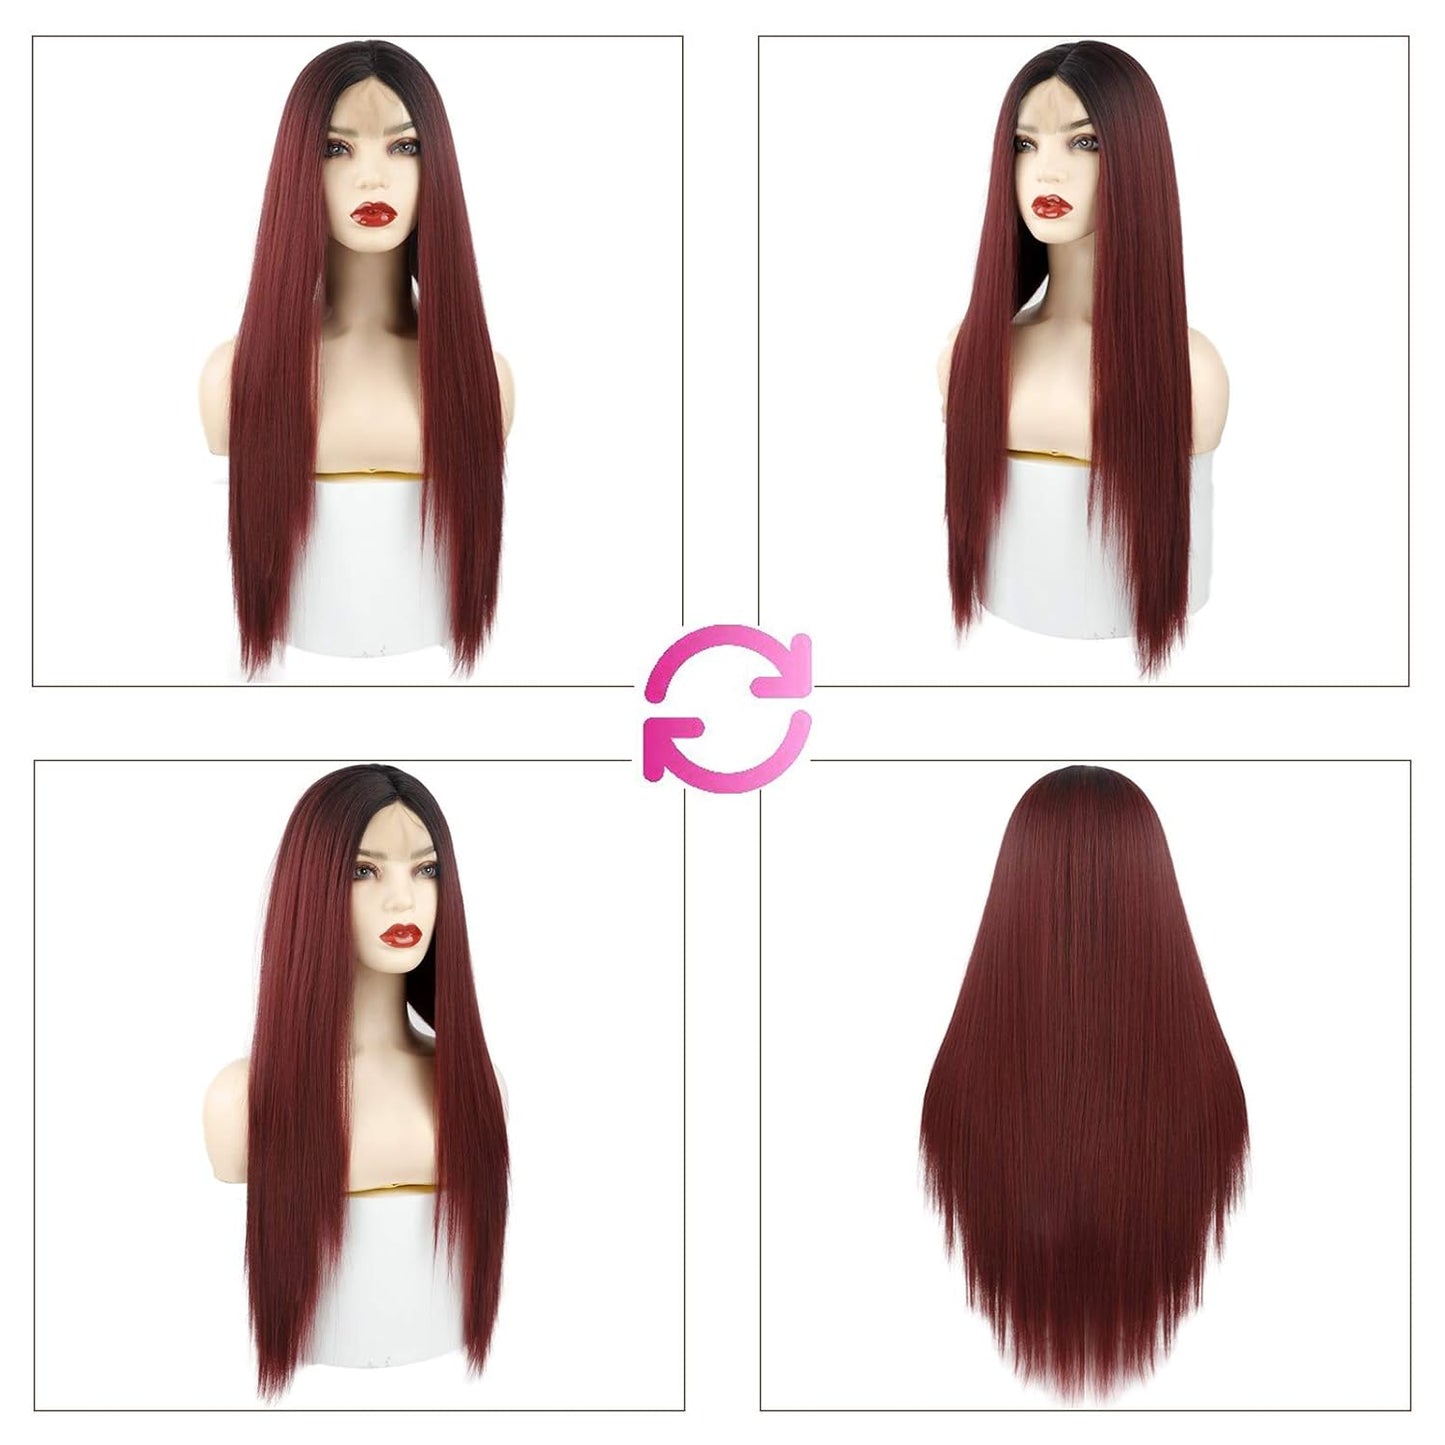 Straight Black Wigs for Women, Synthetic Black Straight Wig, Looking Natural Black Long Hair Wigs 30 inch(Black)